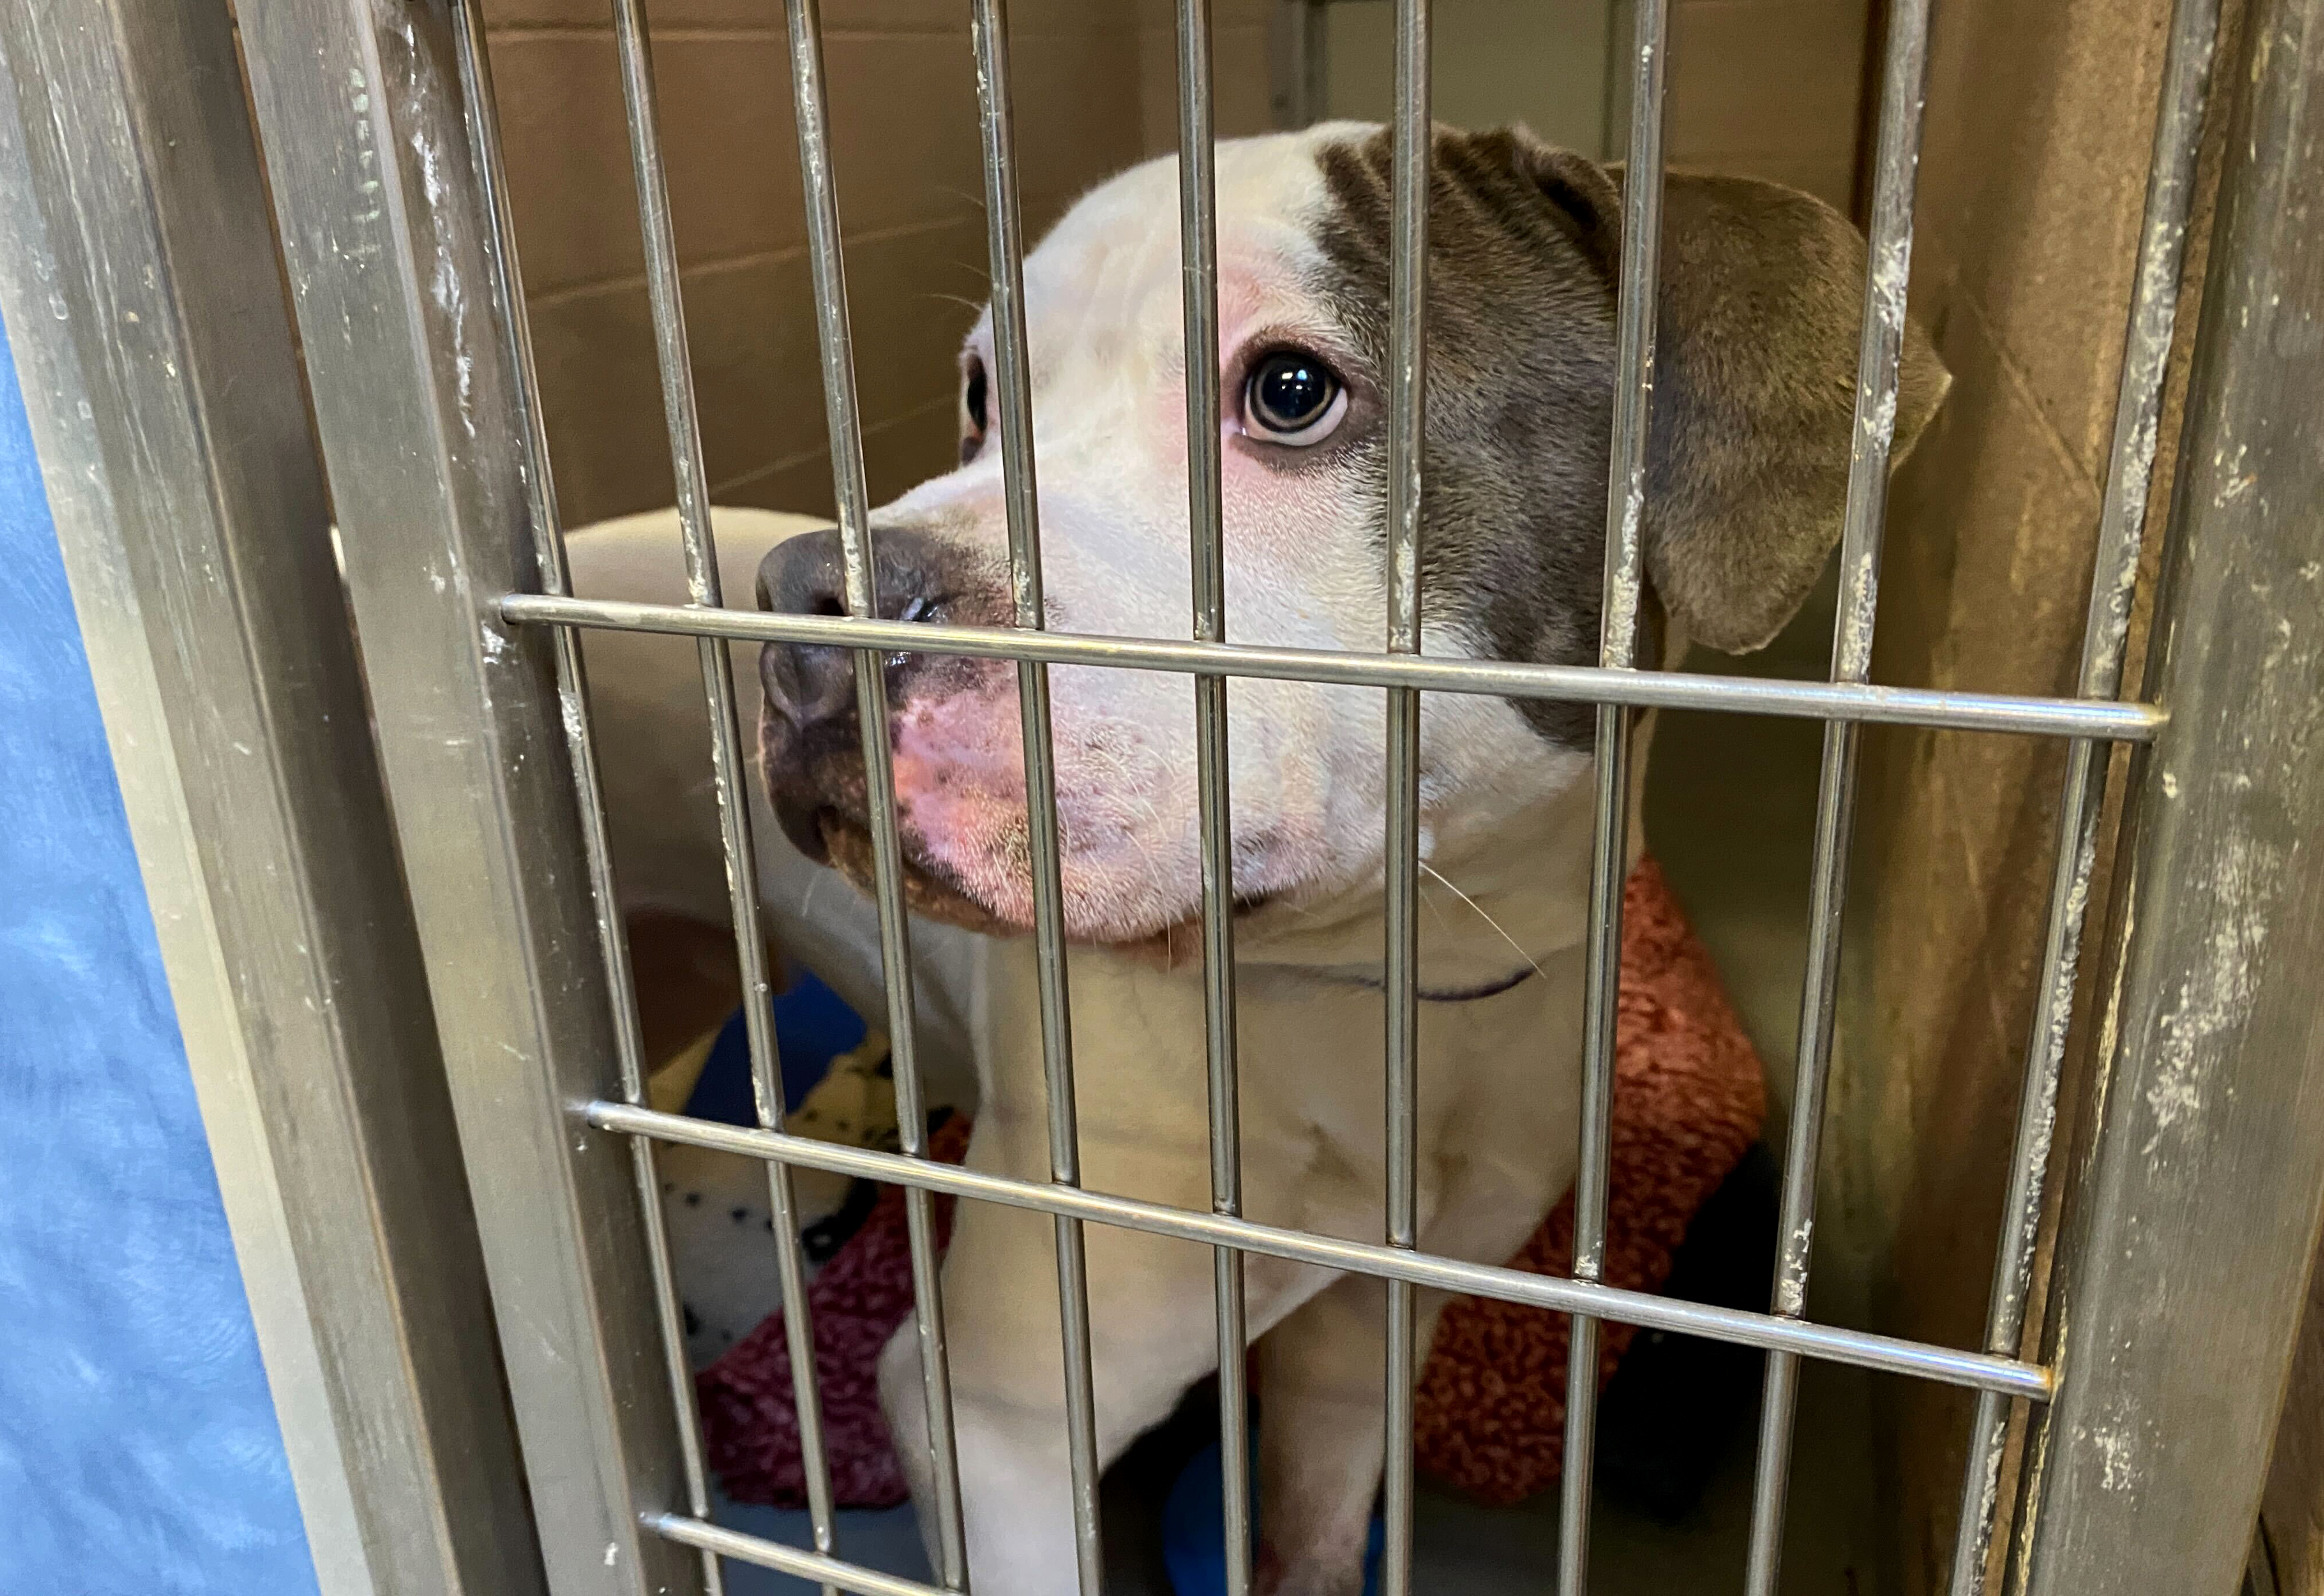 Eroded trust, pandemic pressures pave long road ahead for Multnomah County animal  shelter - OPB